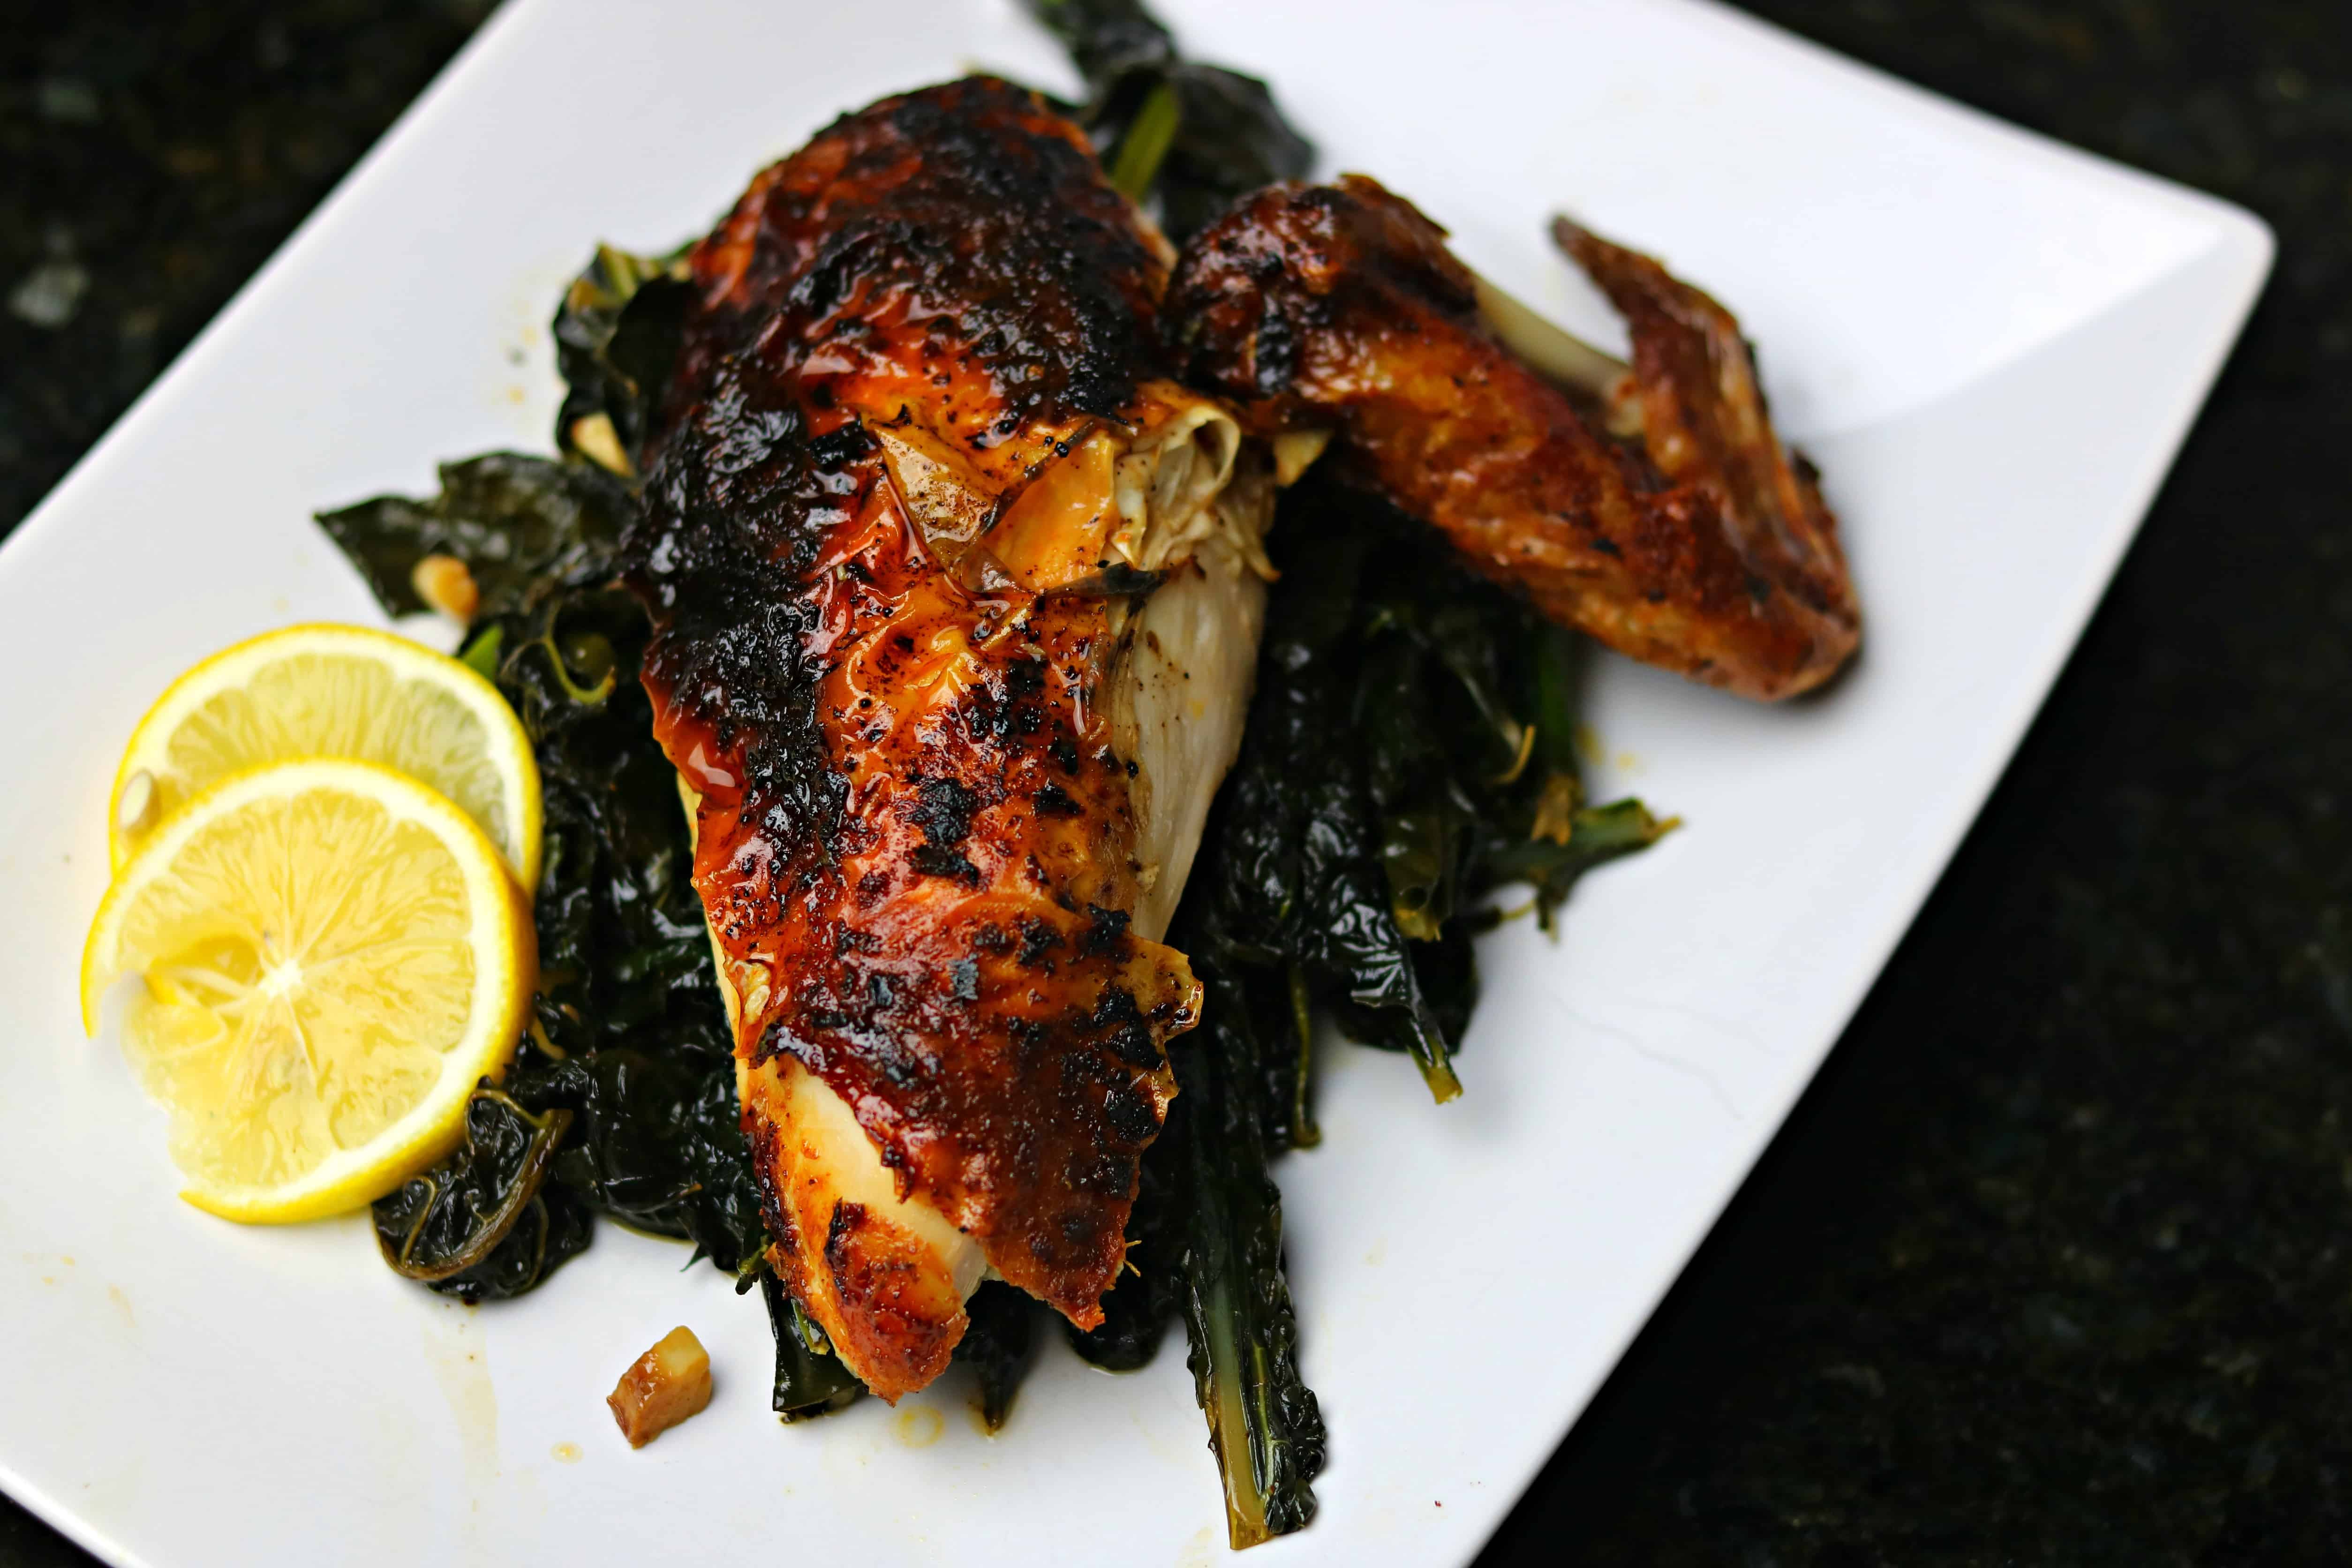 Air Fryer Chicken breast and wing on a bed of collard greens with slices of lemon on a white plate